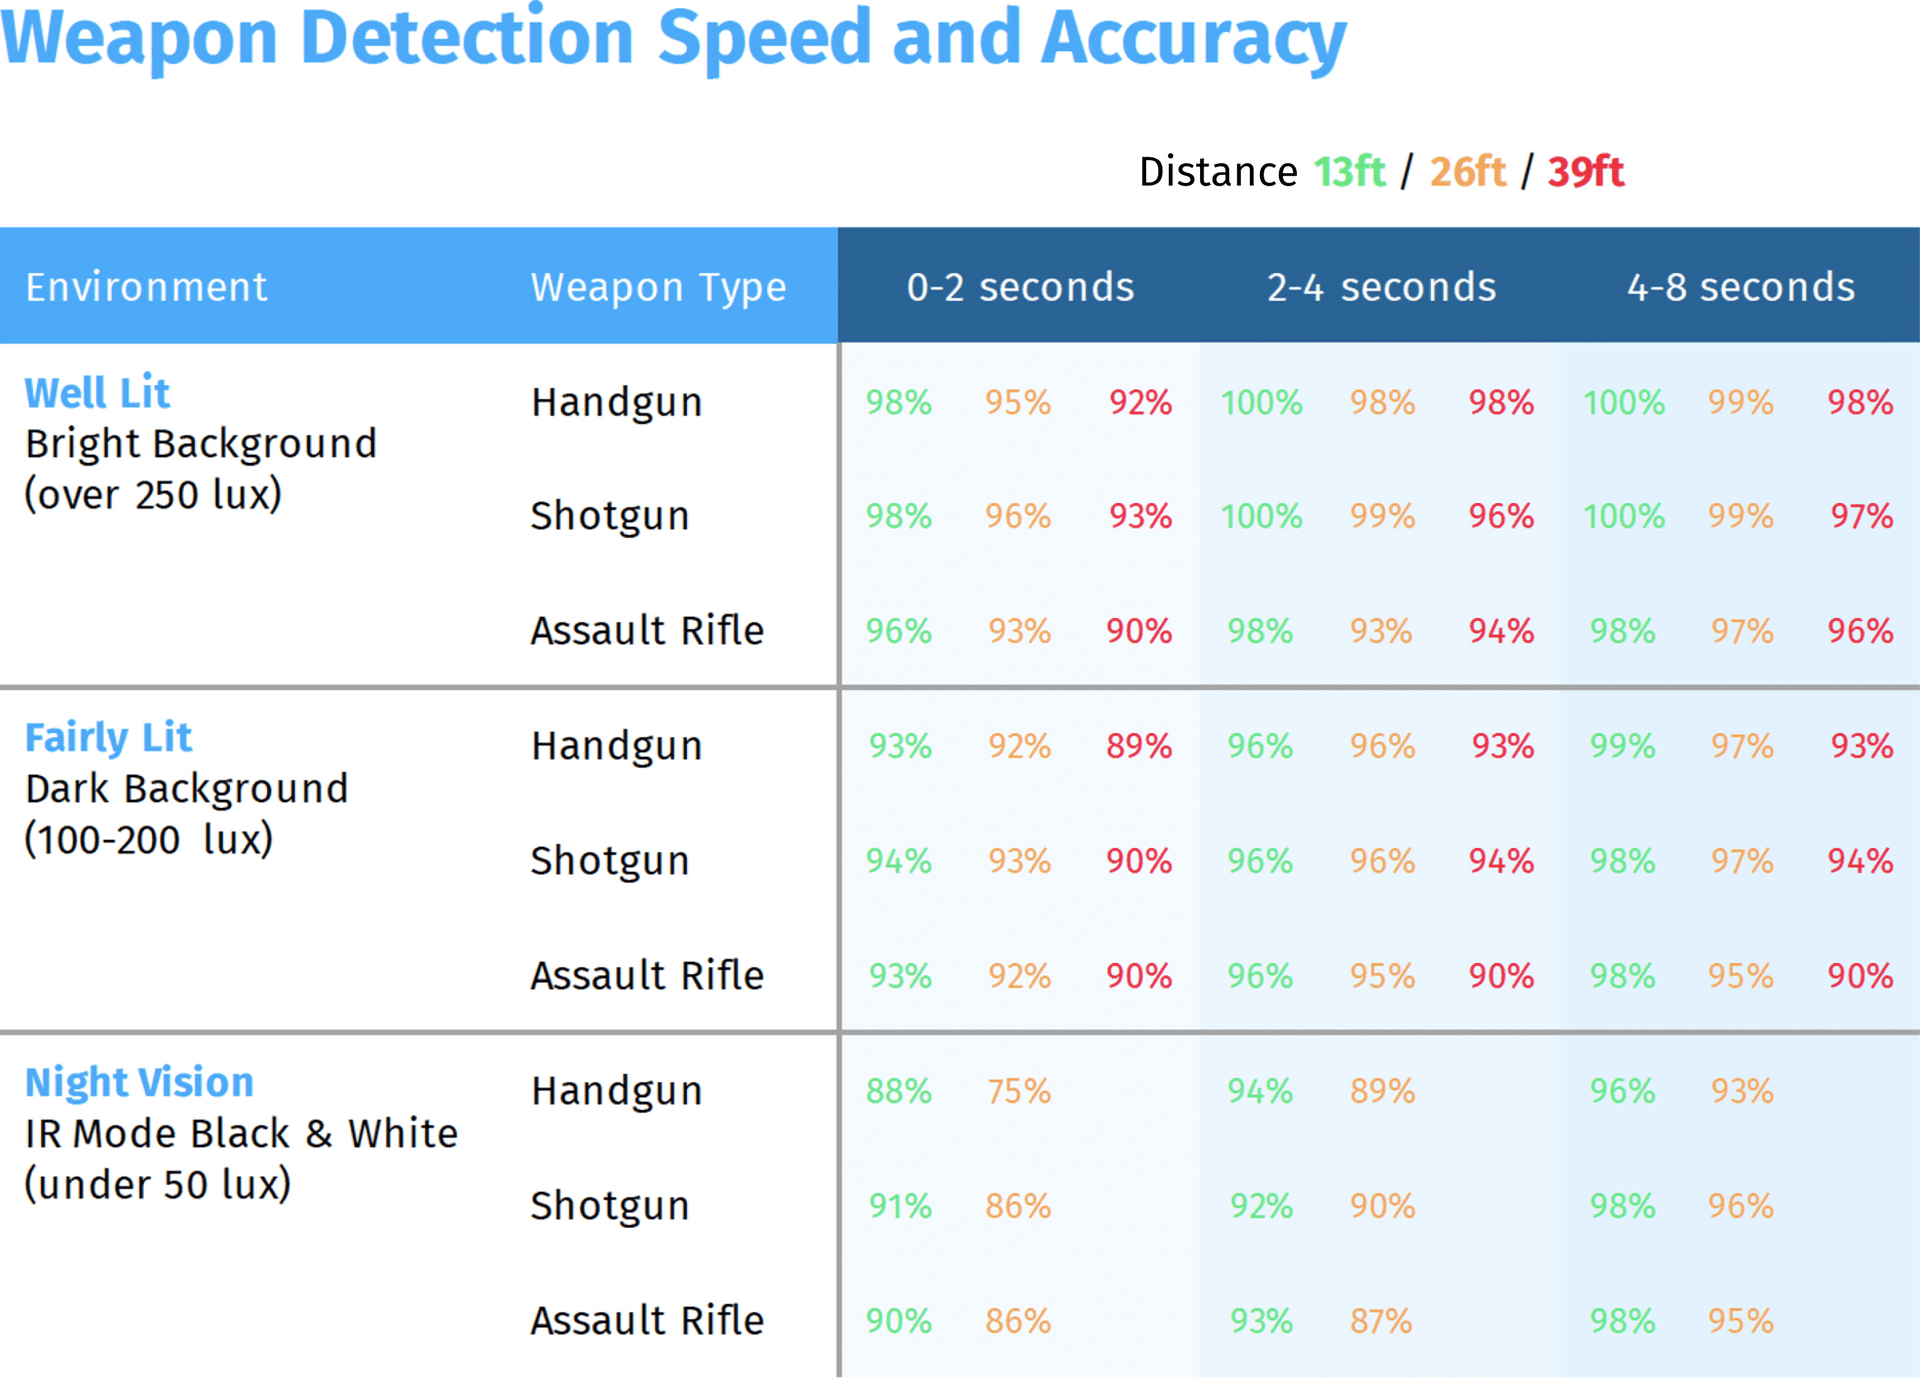 Weapon detection speed and accuracy